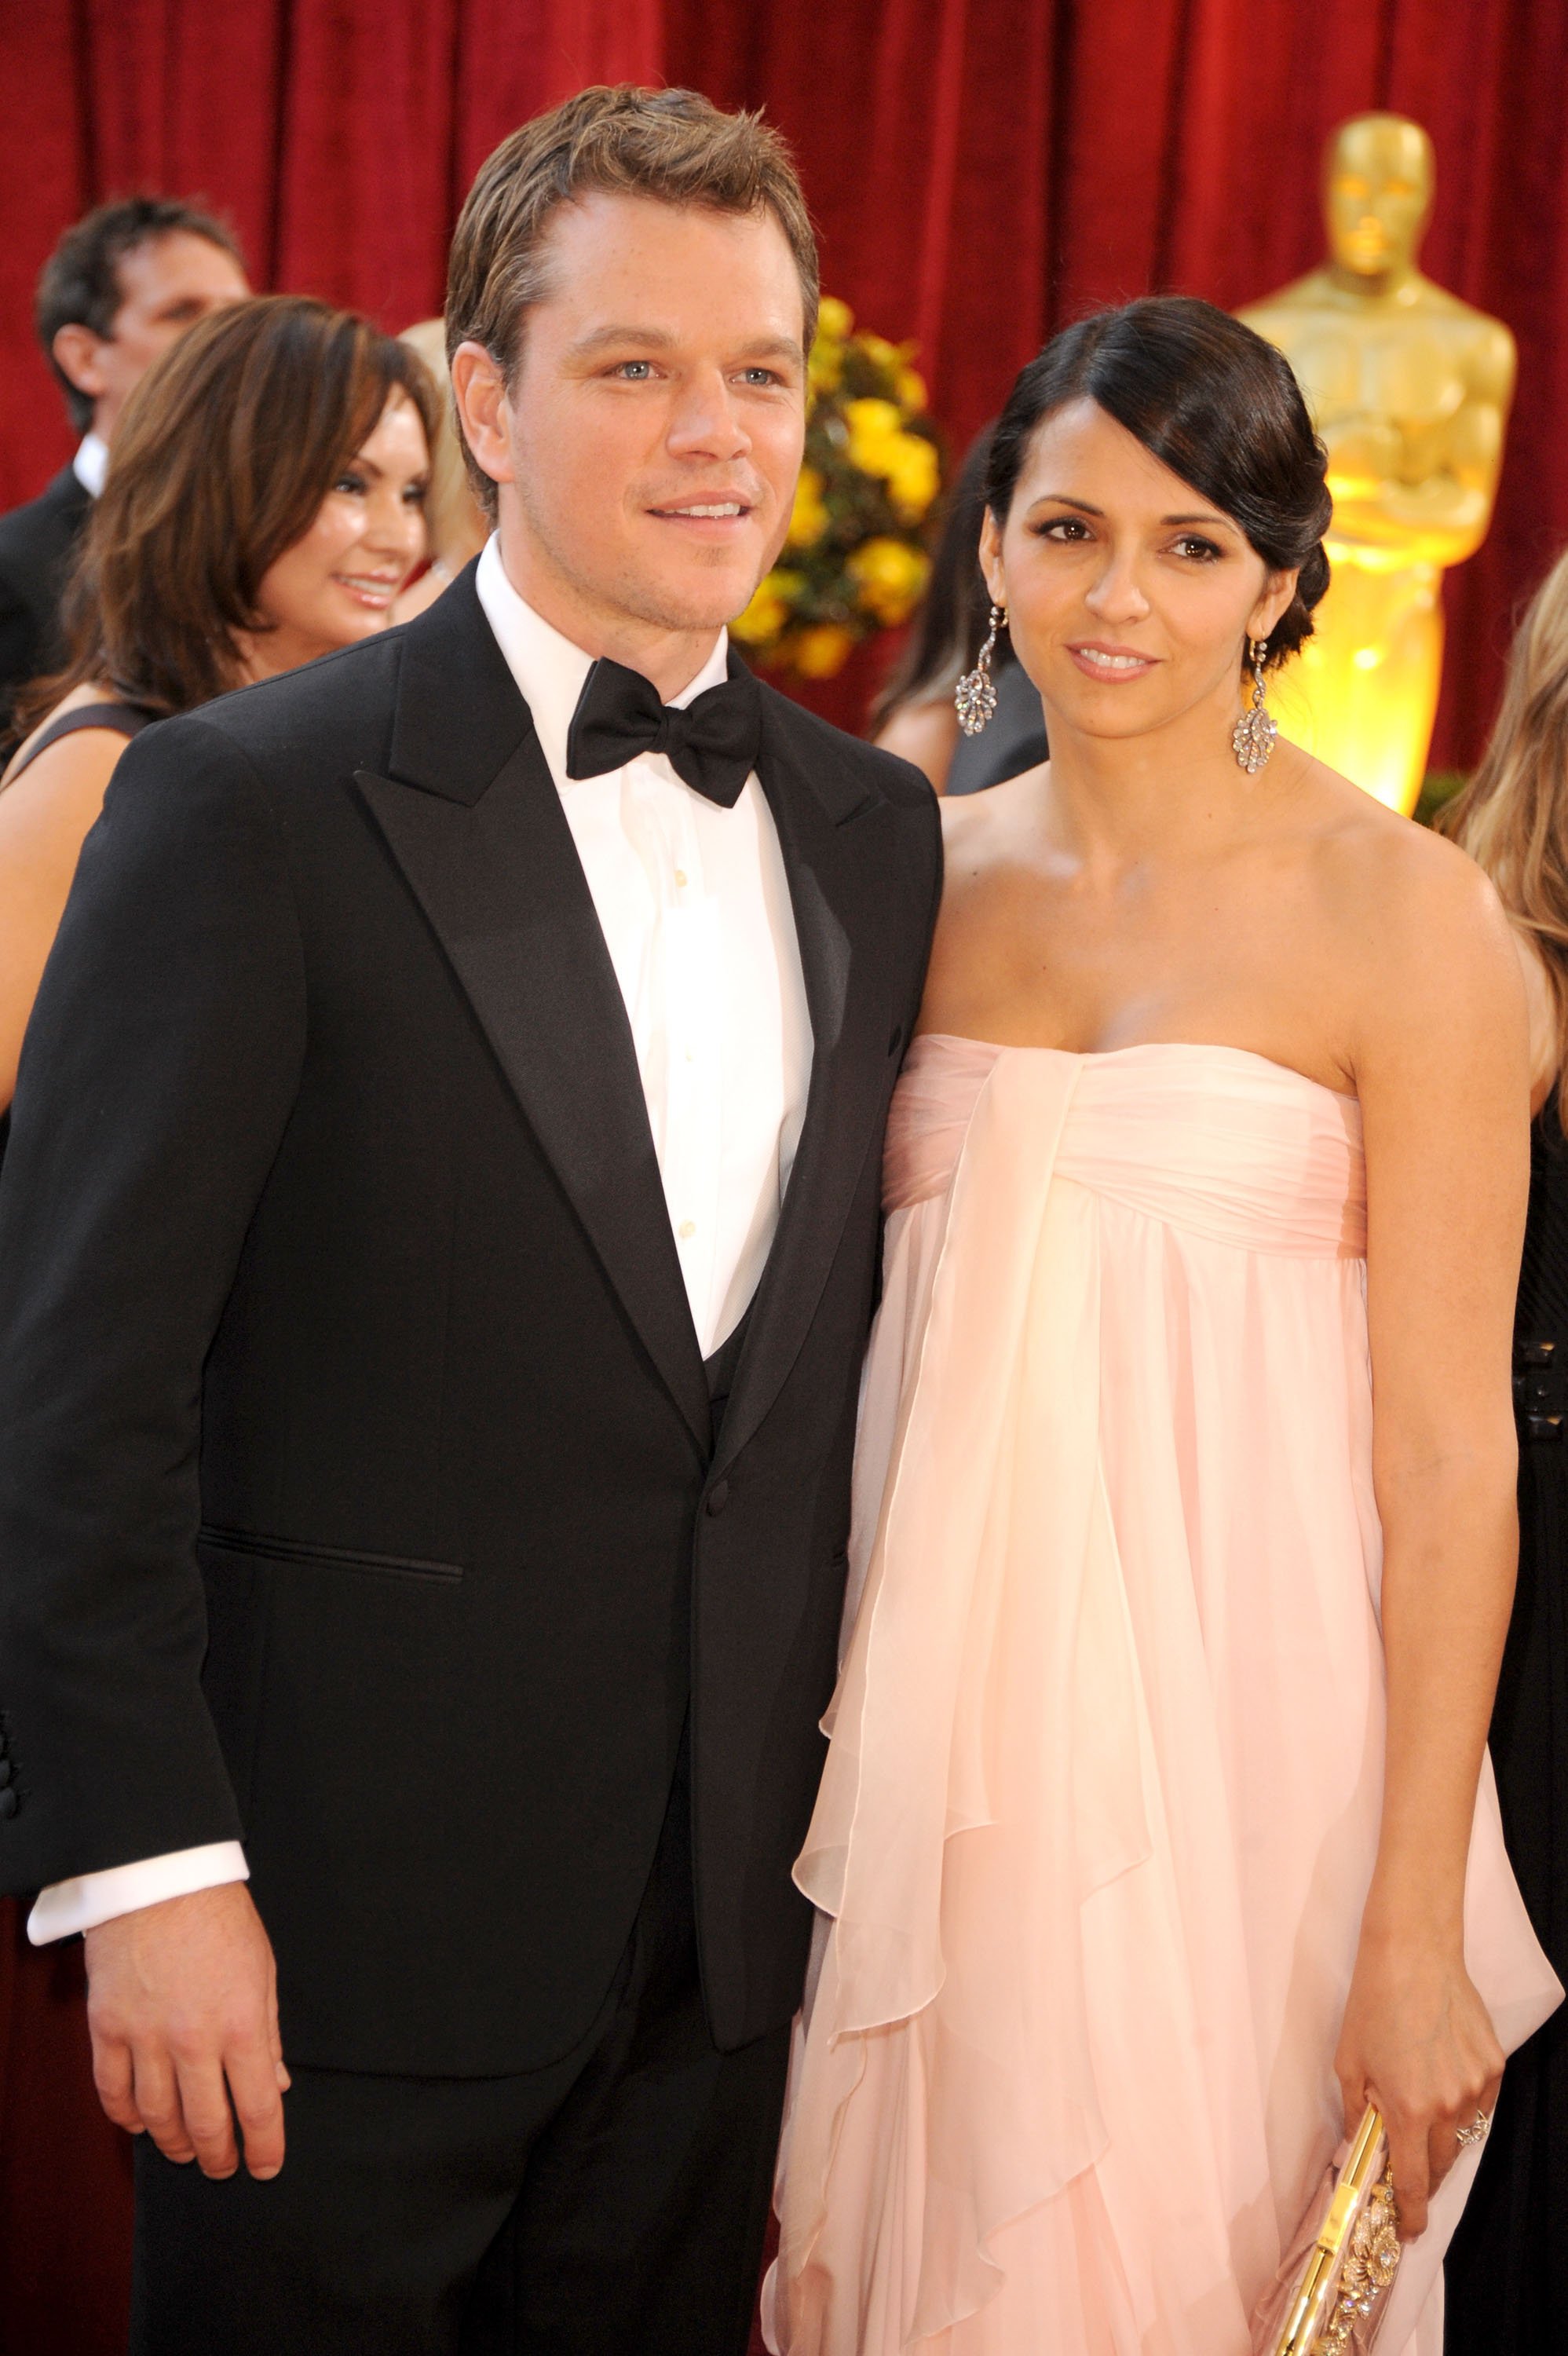 Matt Damon and wife Luciana Damon arrives at the 82nd Annual Academy Awards held at Kodak Theatre on March 7, 2010 in Hollywood, California | Source: Getty Images